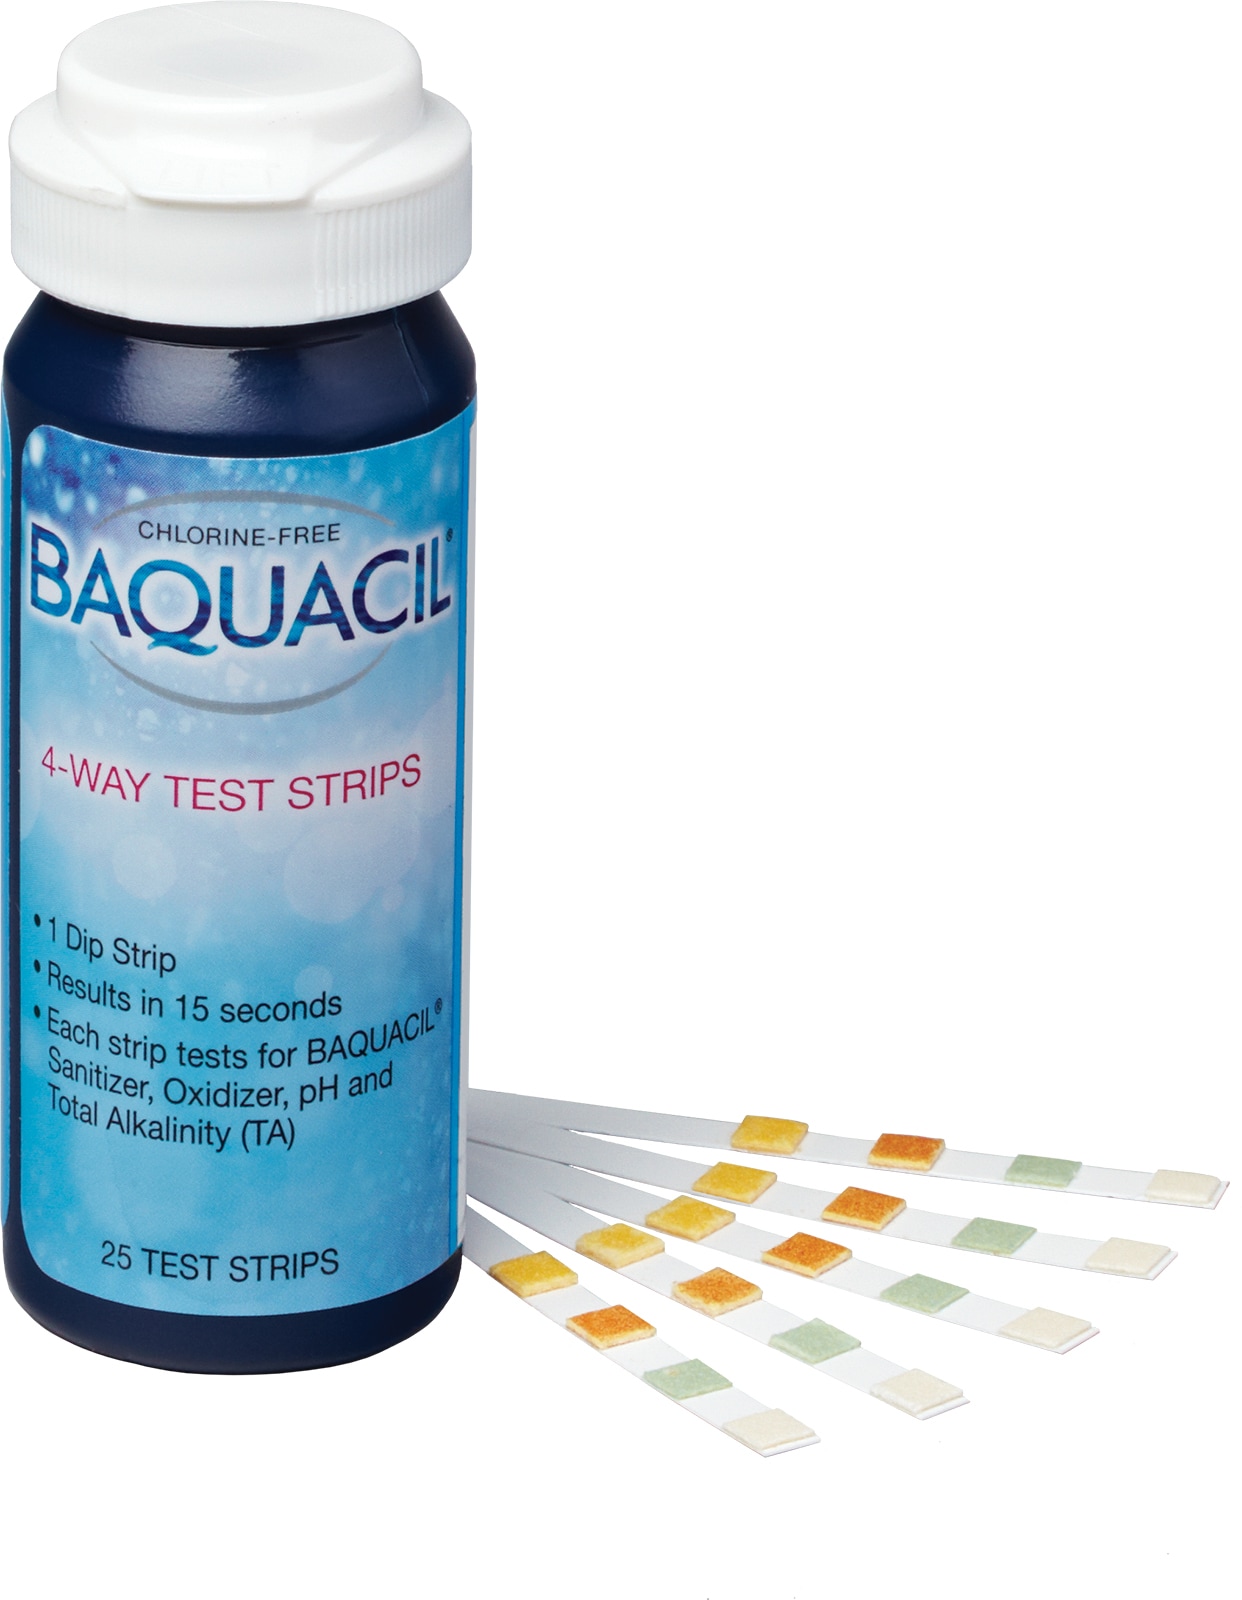 Product-84396_BAQUACIL_Test Strips